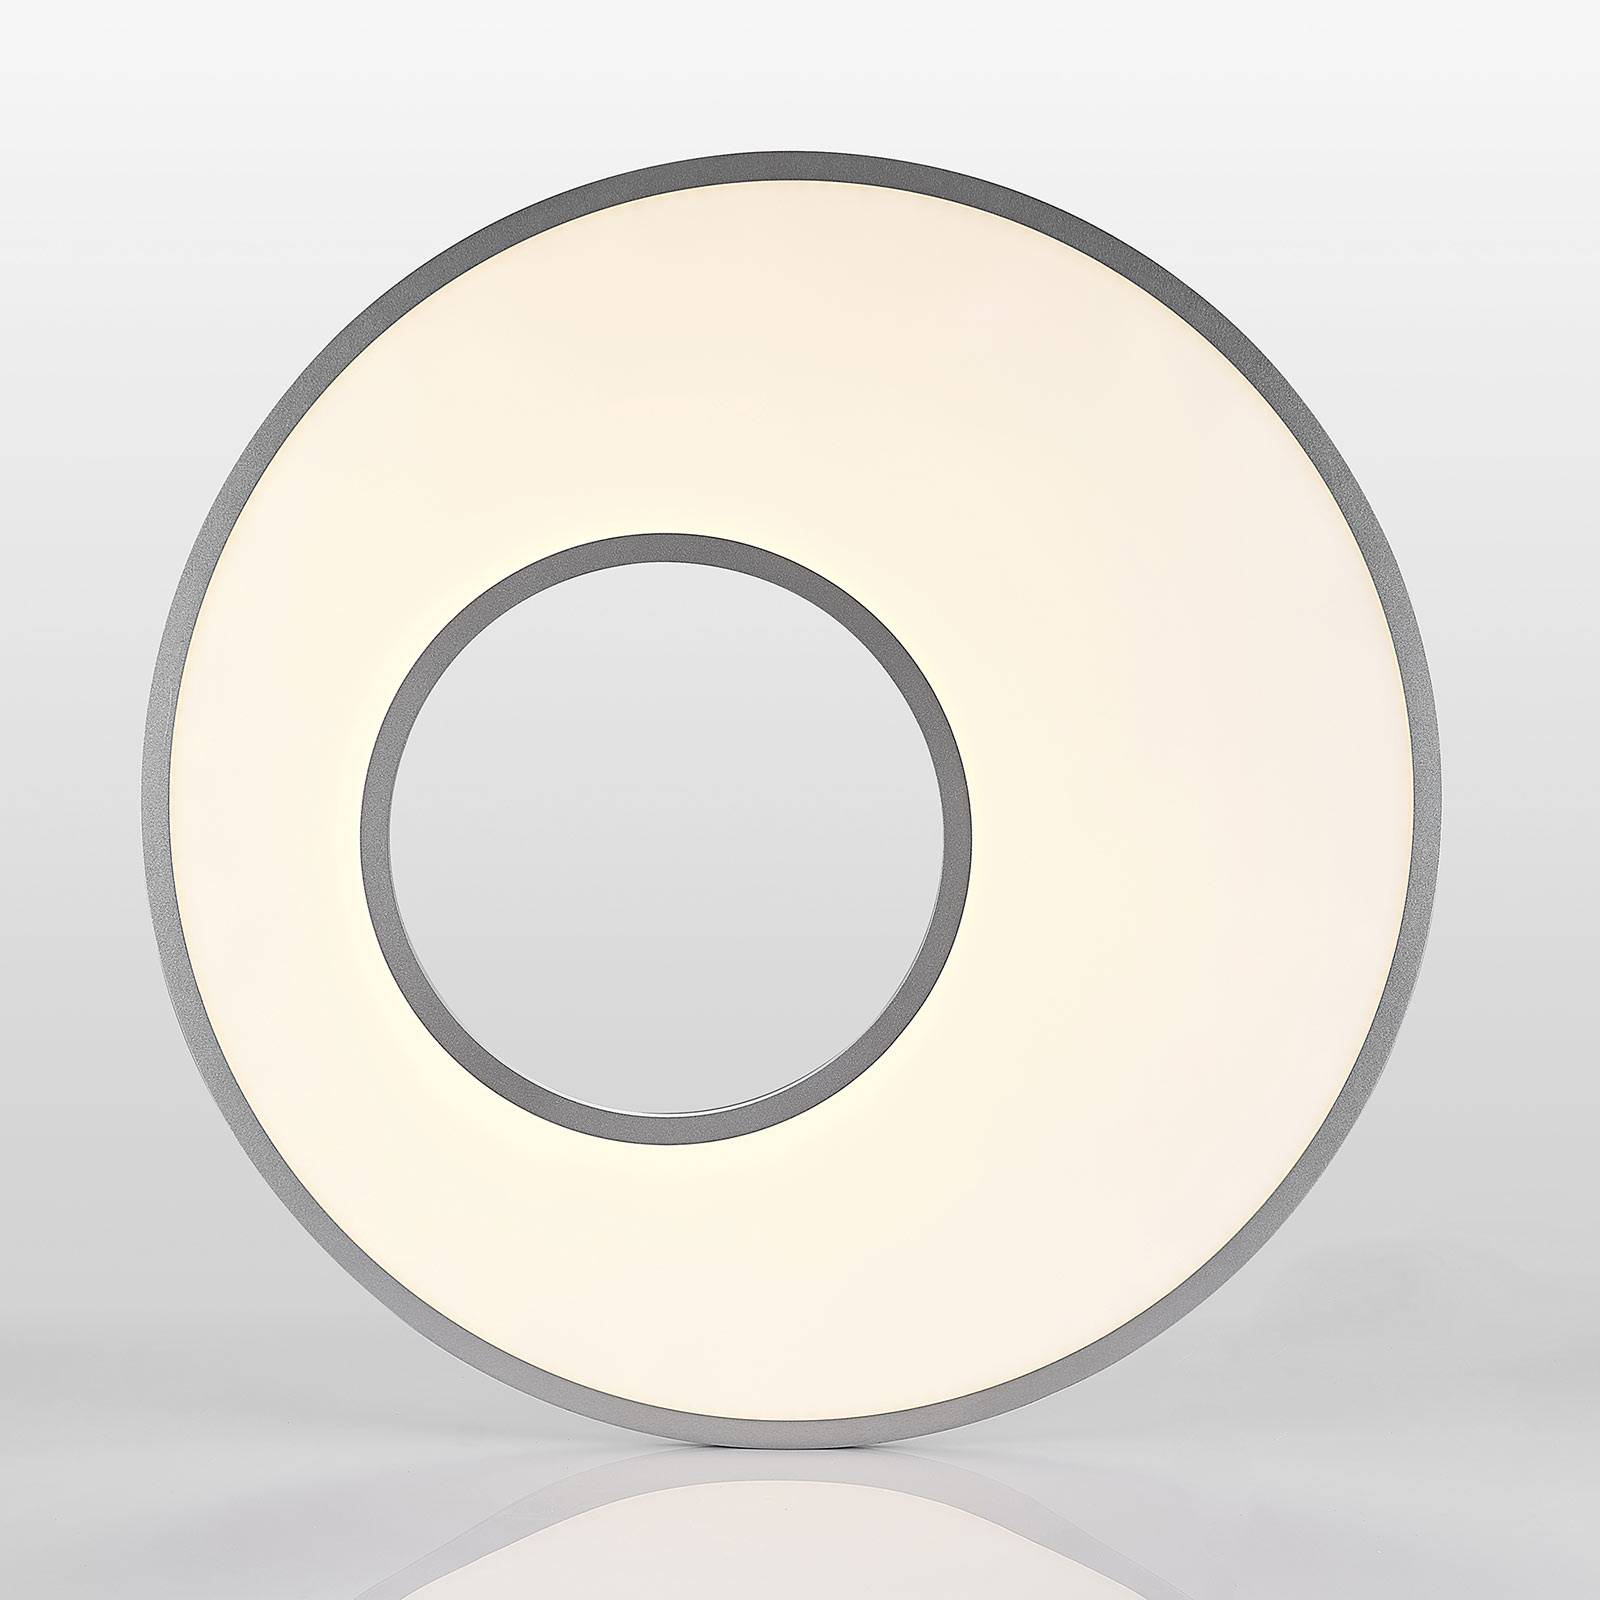 Image of Lucande Plafonnier LED Durun, dimmable, CCT, rond, 80 cm 4251096559637